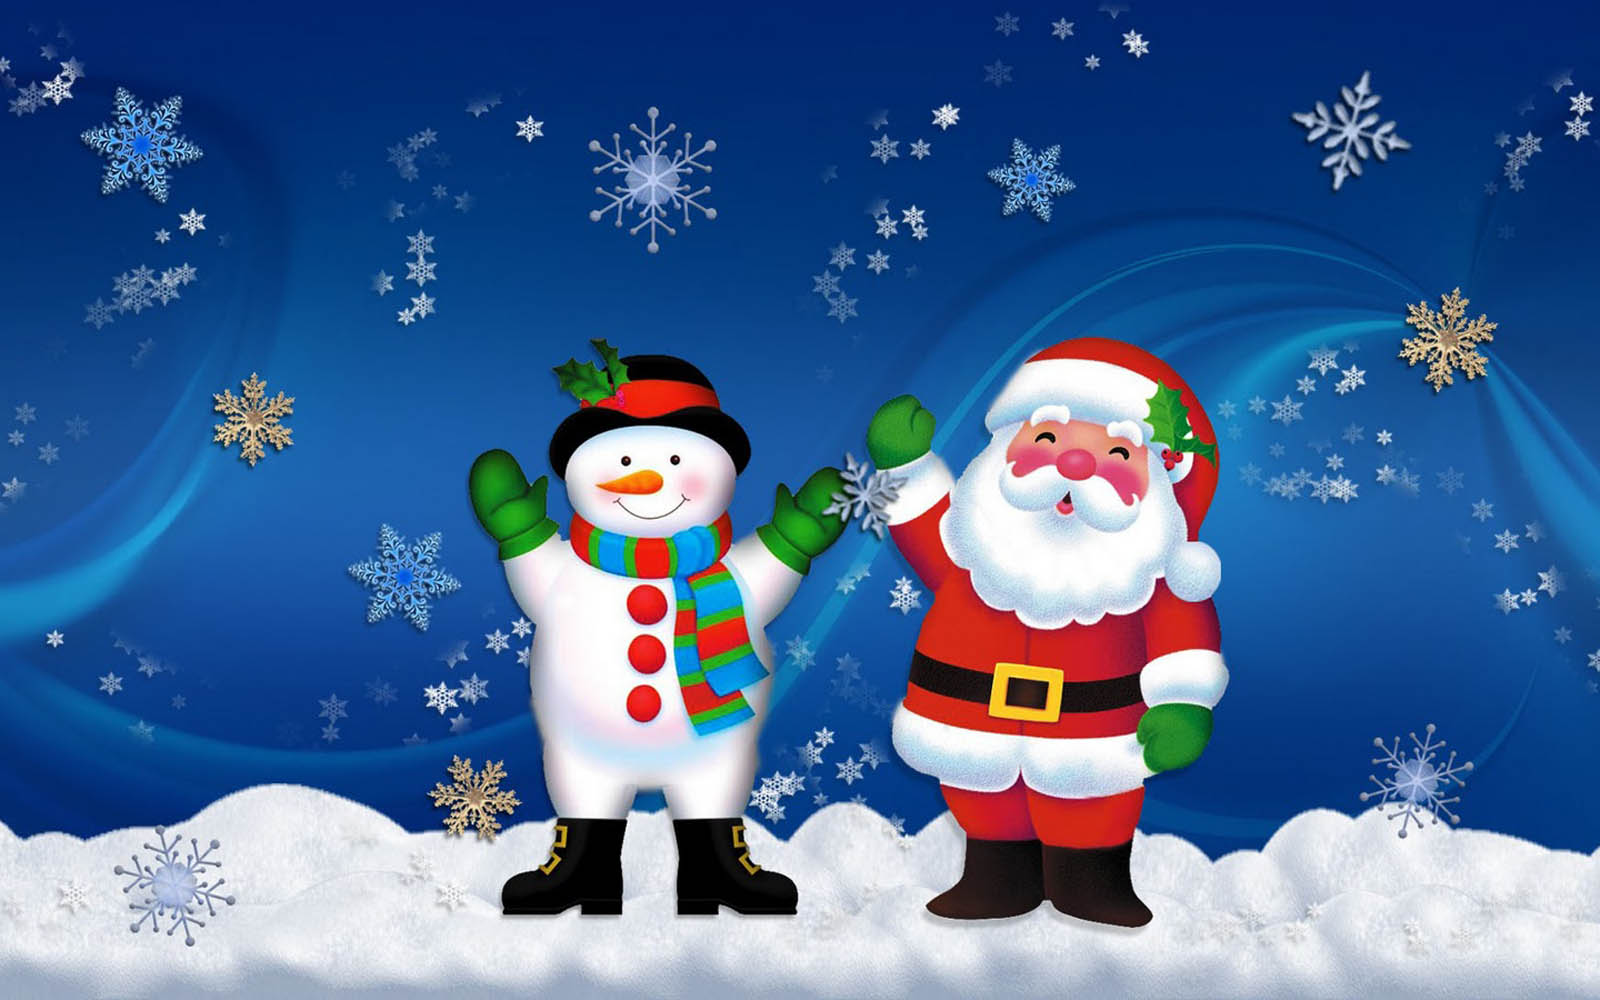 Snowman Background Wallpaper Paos Pictures And Image For